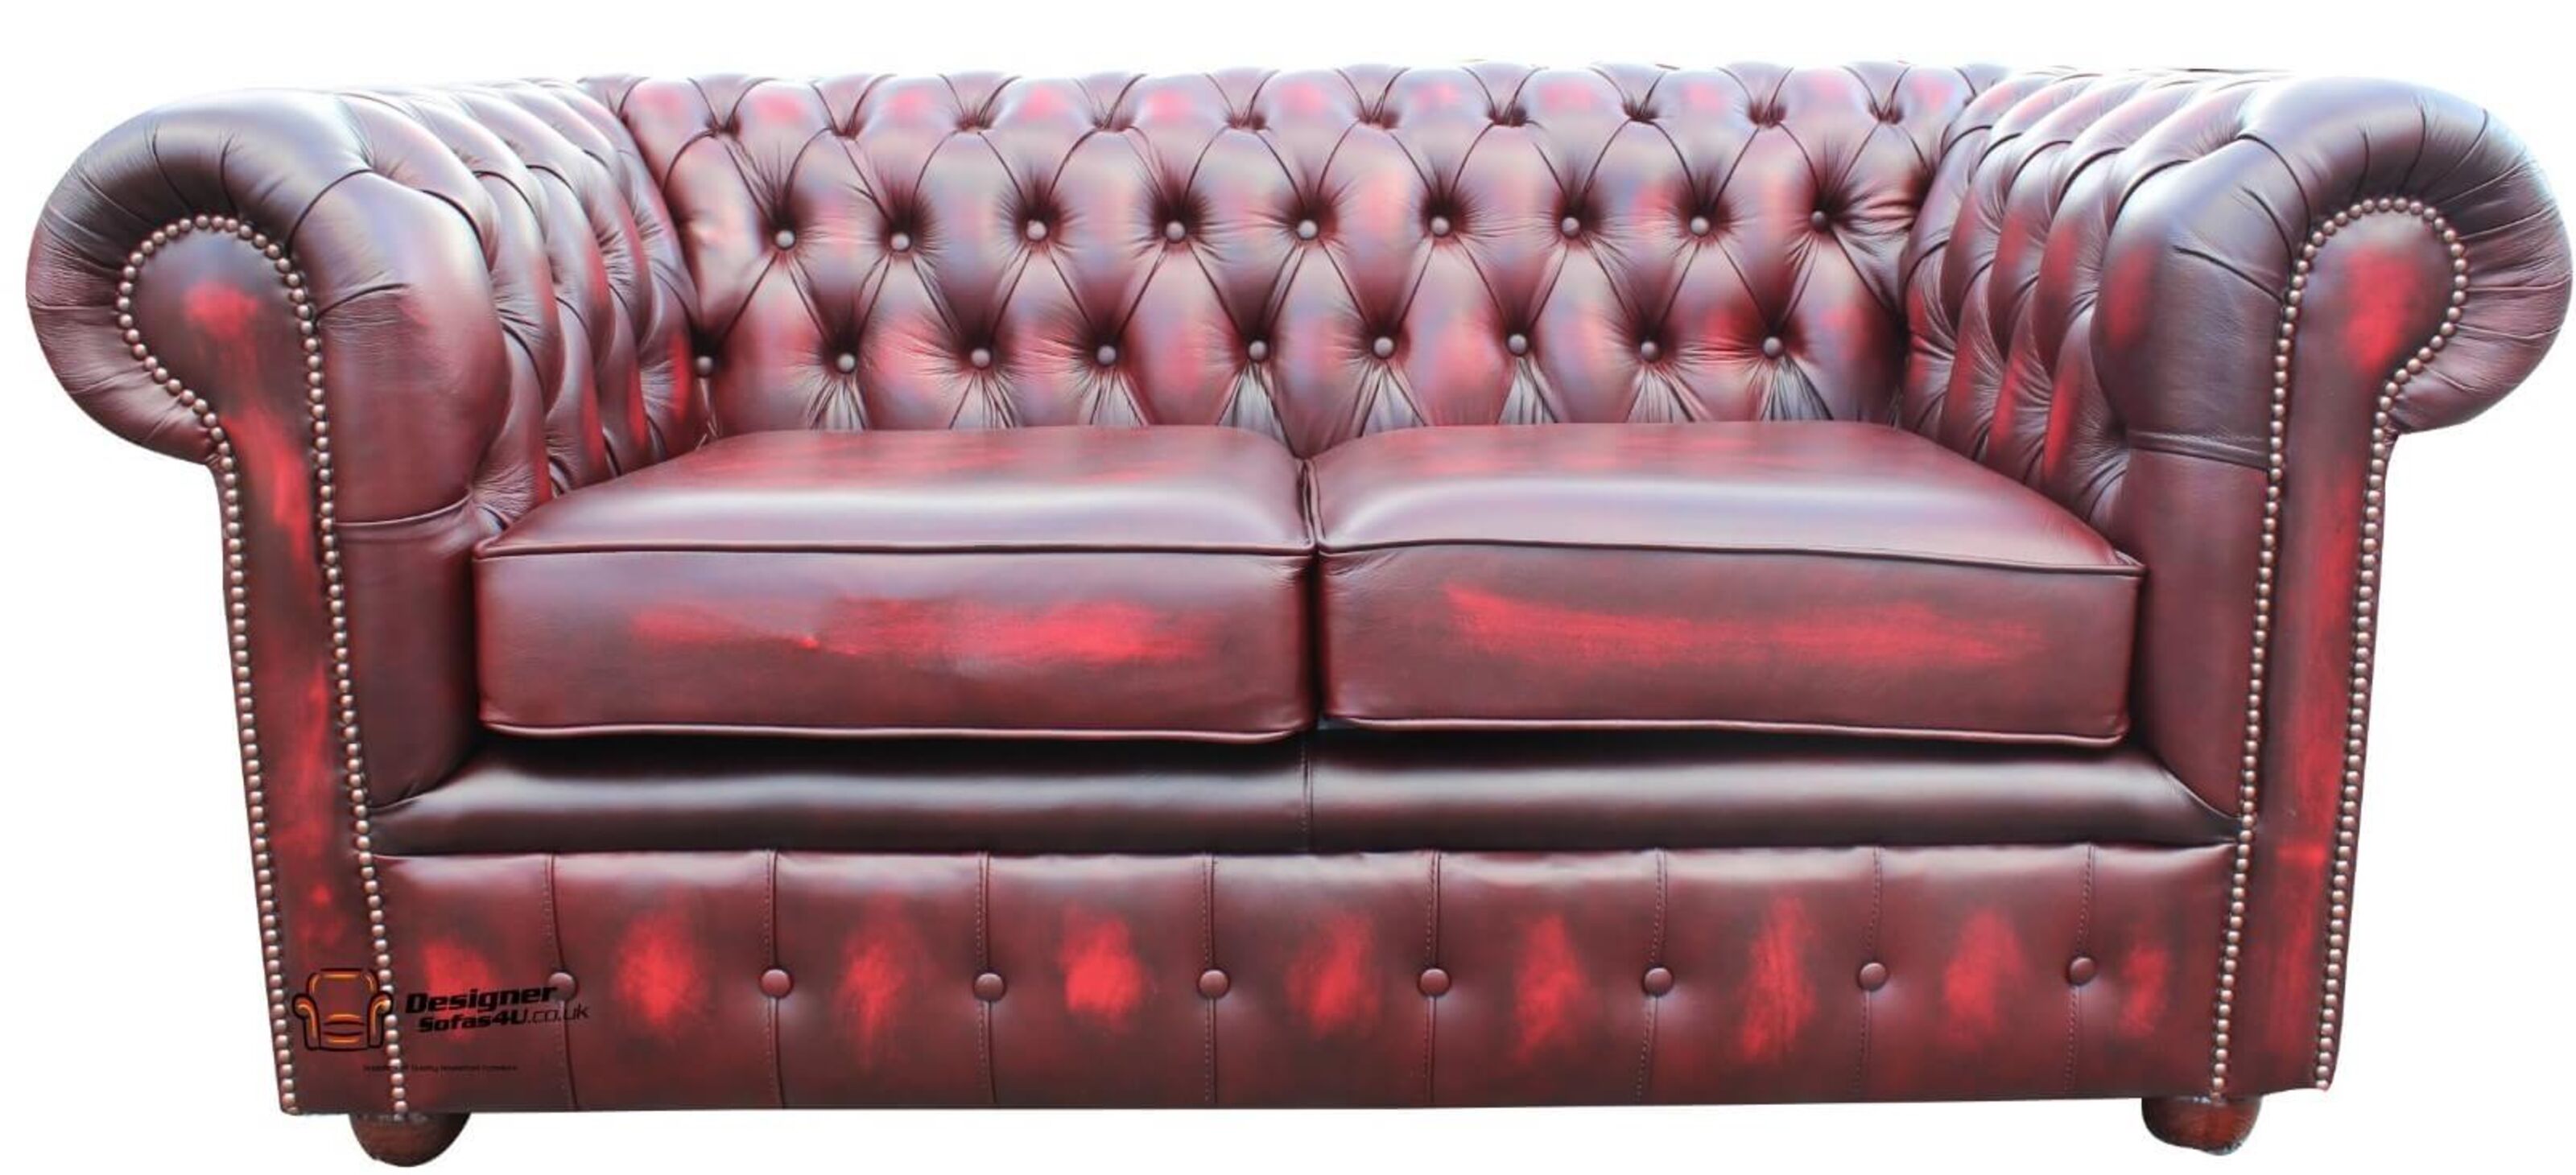 Originating Opulence The Authentic Craftsmanship of Chesterfield Sofas  %Post Title